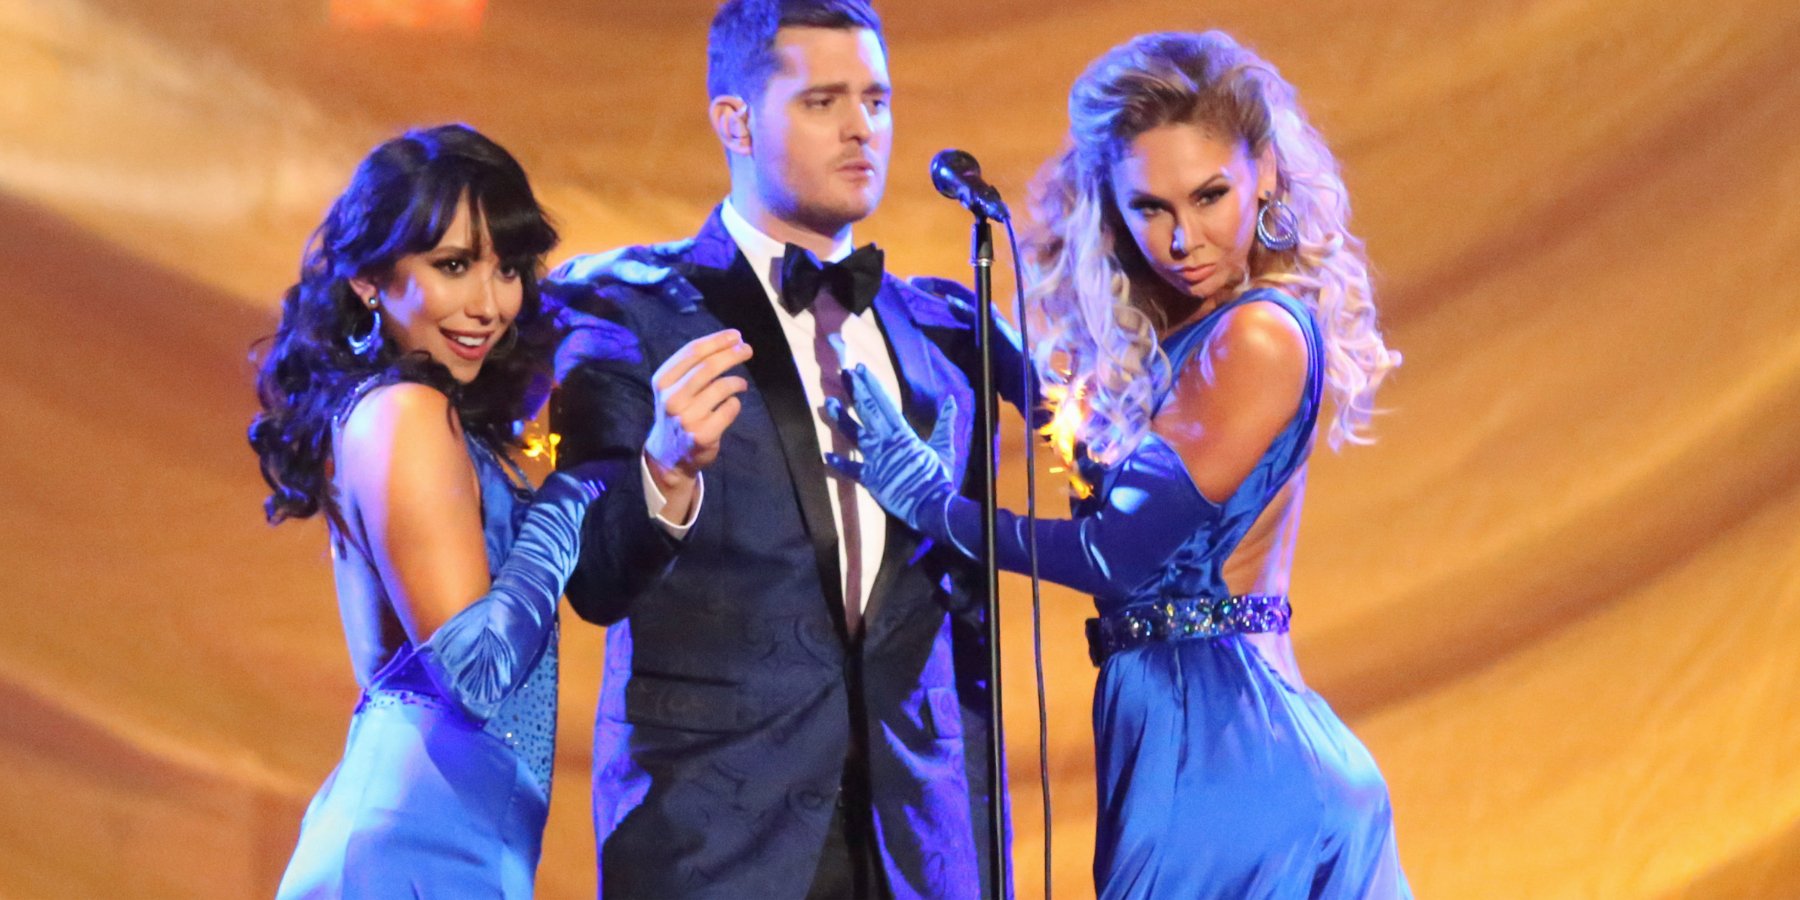 Michael Buble performed during season 16 of 'DWTS.'